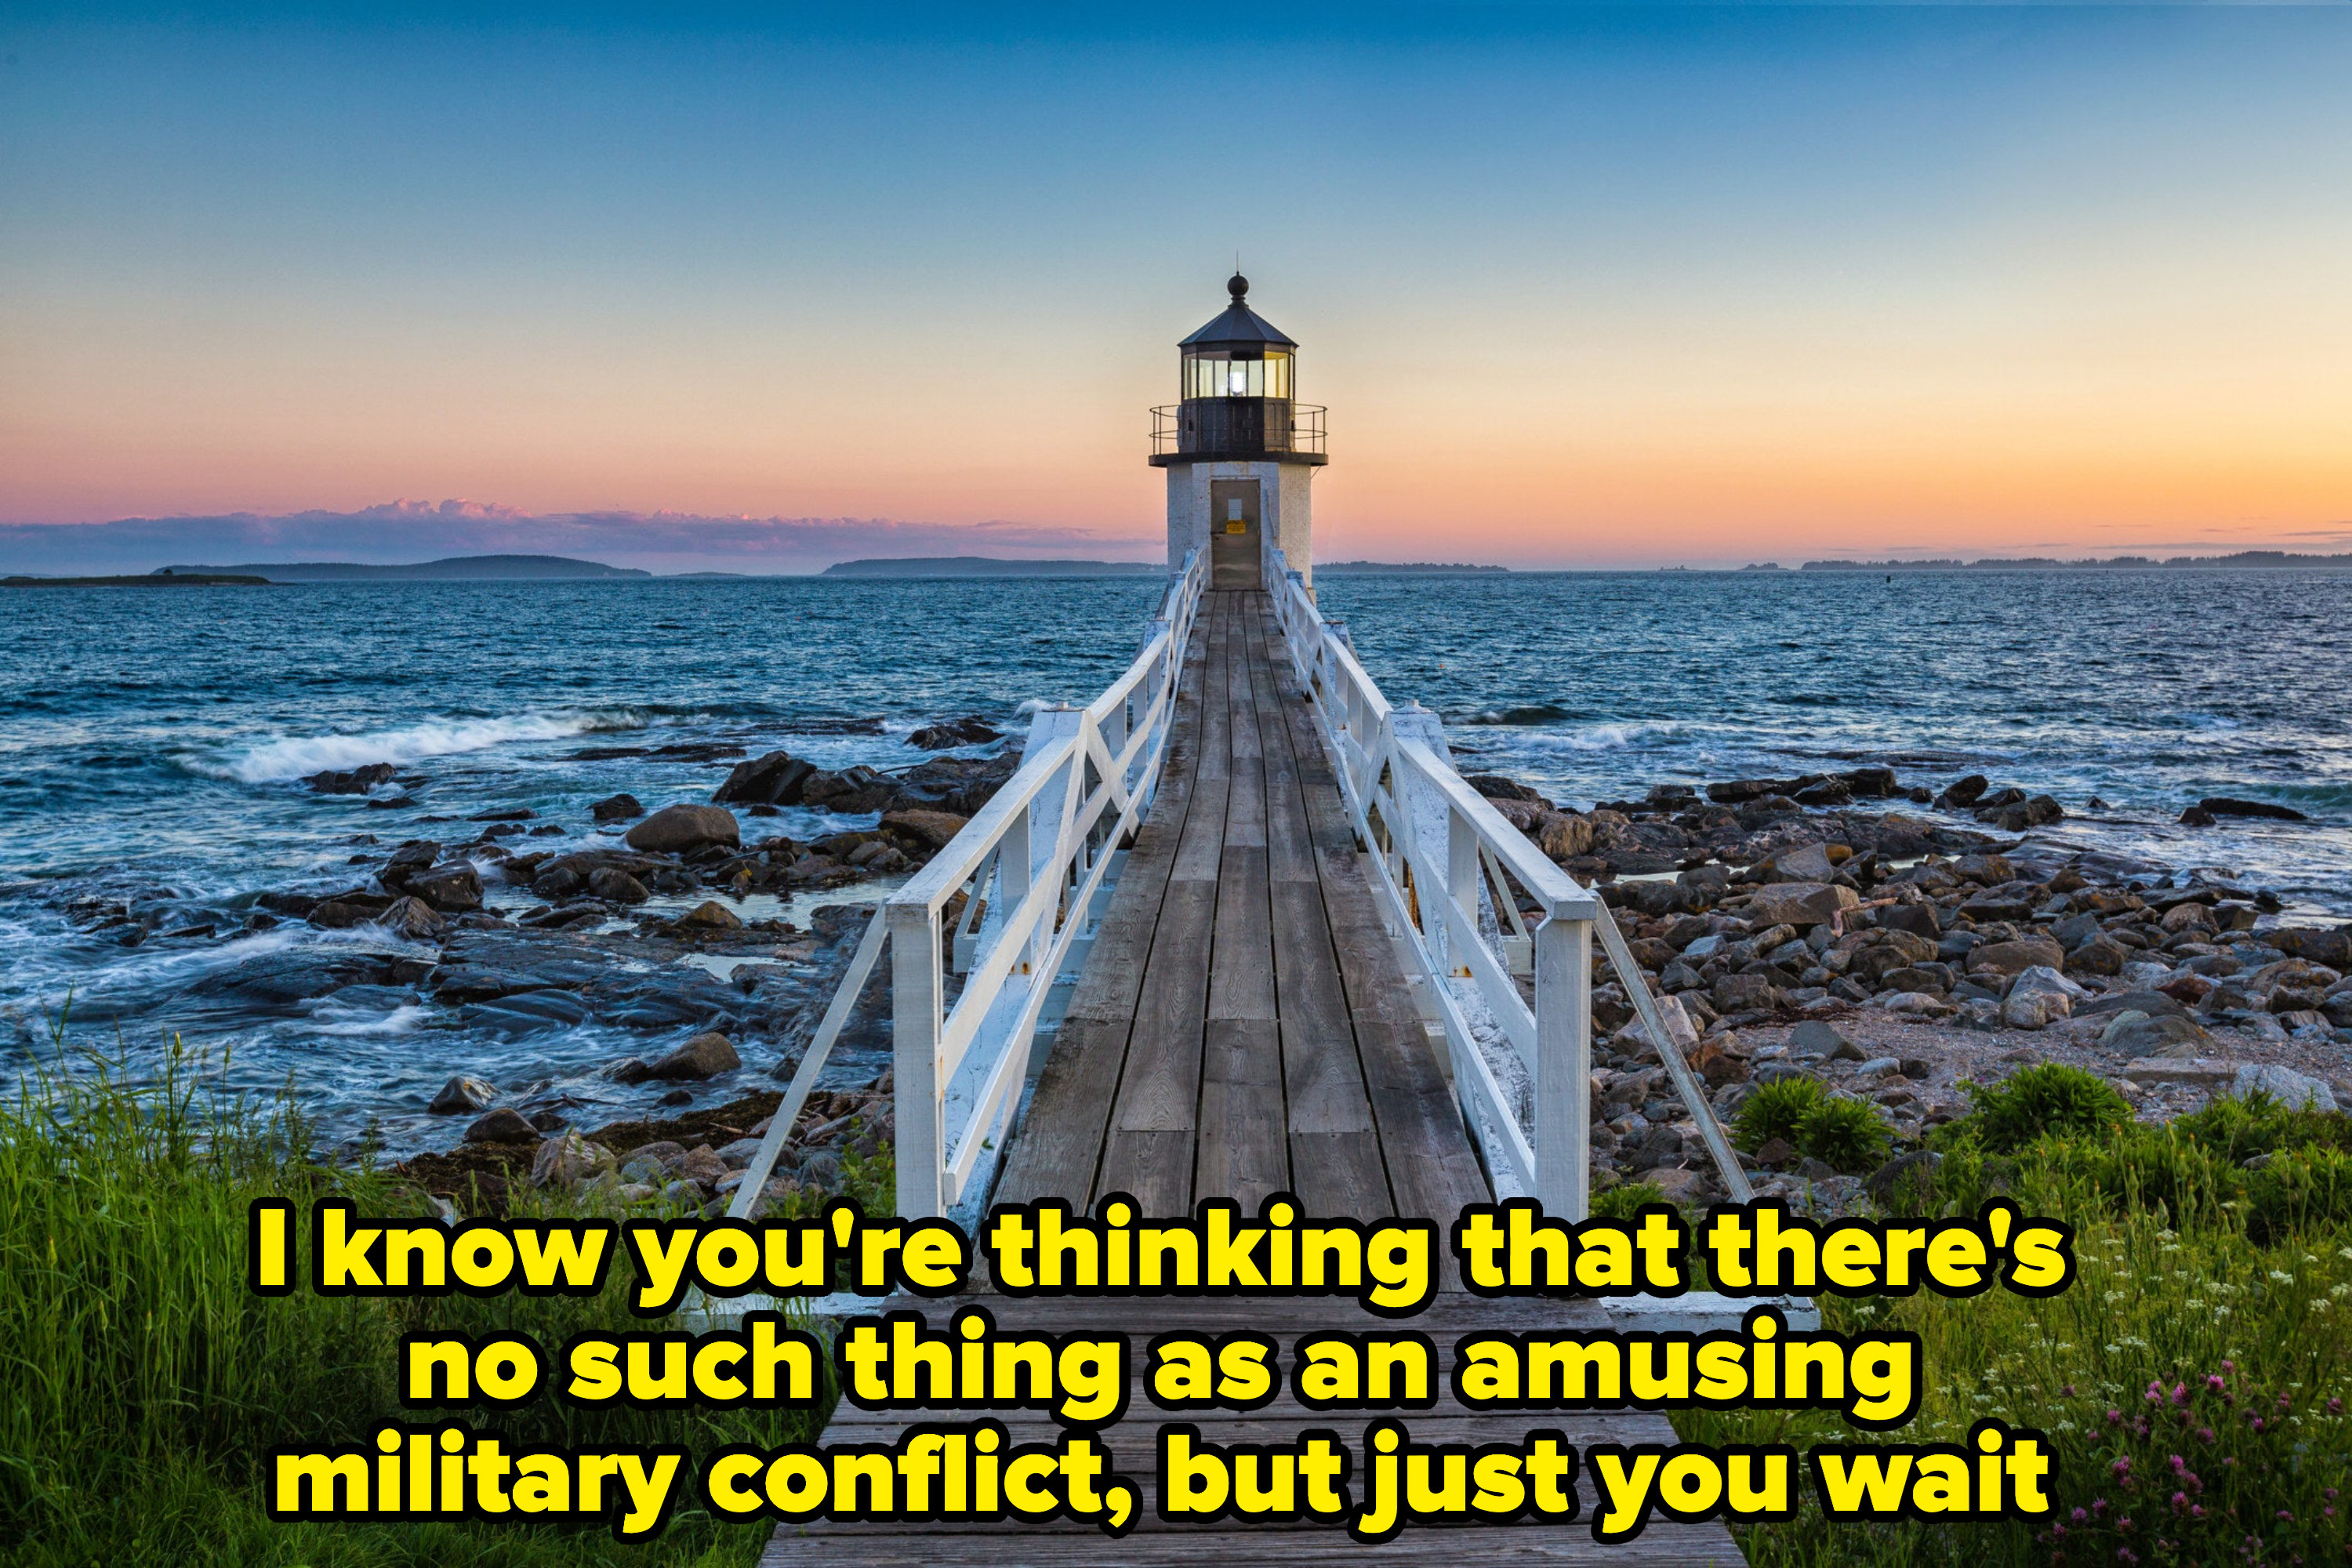 A lighthouse on the water, with caption: &quot;I know you&#x27;re thinking that there&#x27;s no such thing as an amusing military conflict, but just you wait&quot;